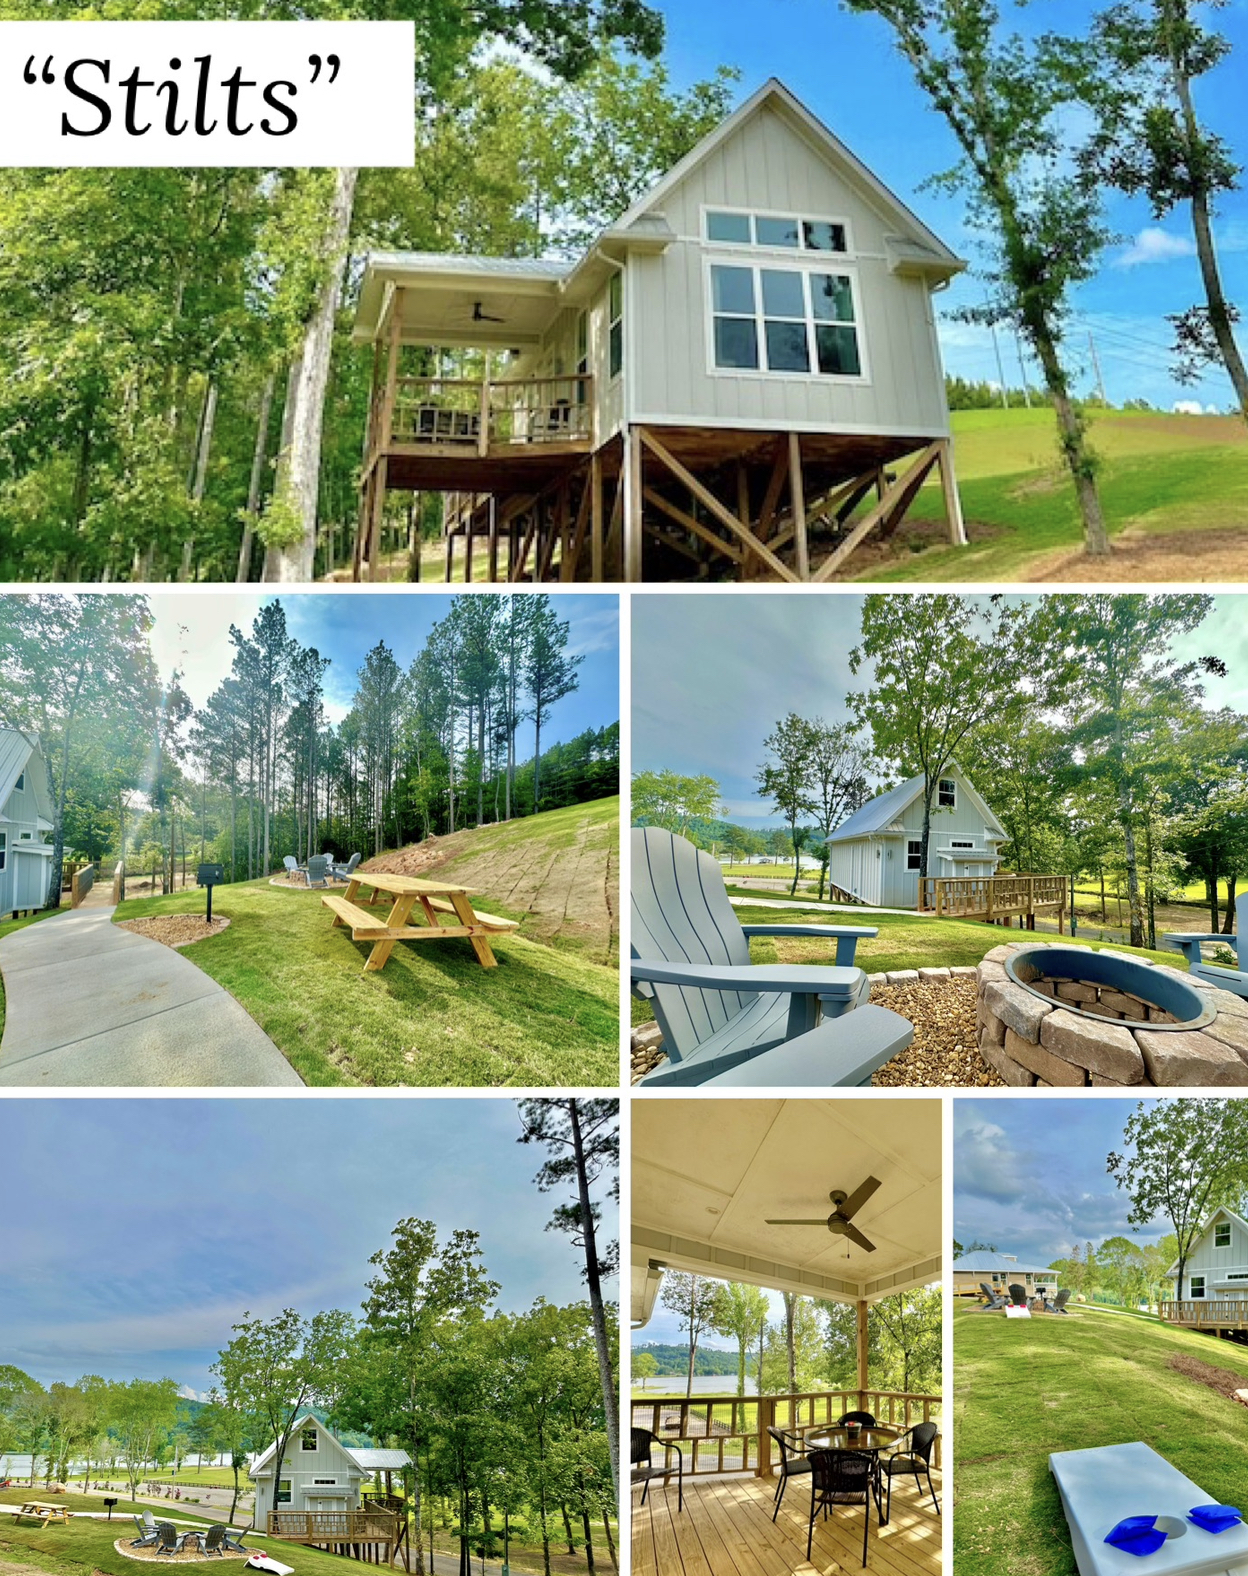 The "Stilts" home is about 500ft from the main house & 200ft from the pool.